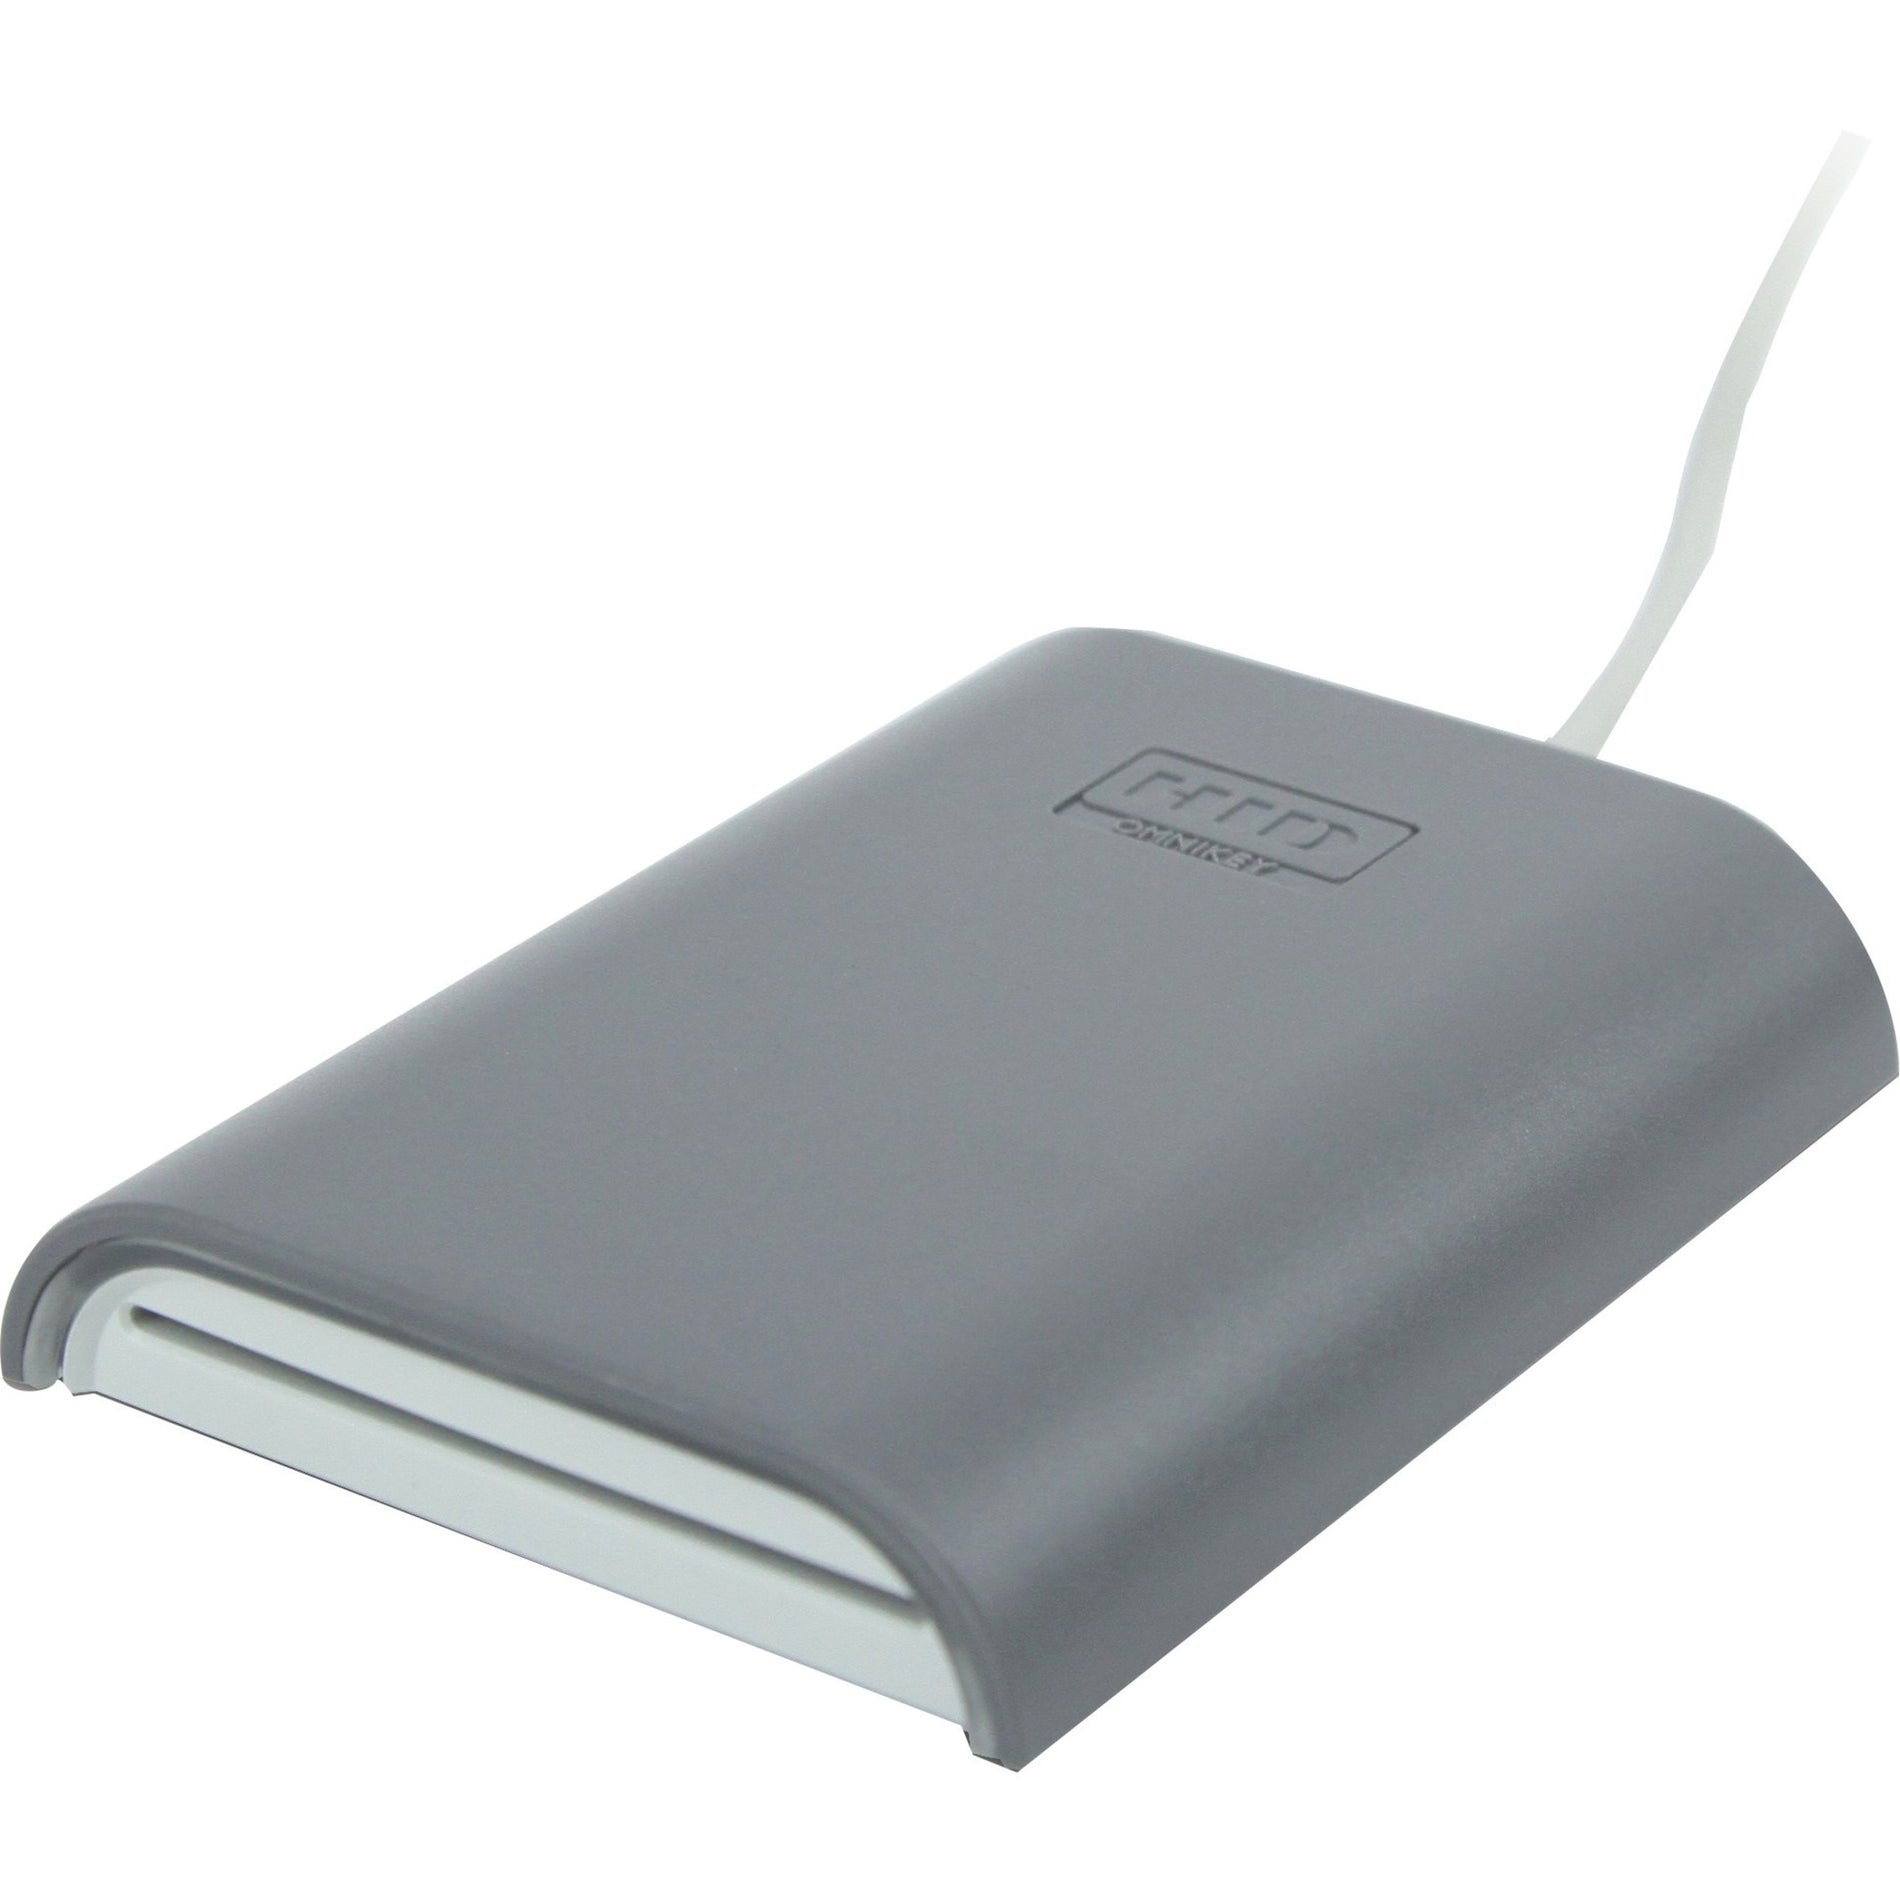 HID R54220301 OMNIKEY Dual Interface Contact and Contactless Smart Card Reader, USB Connectivity